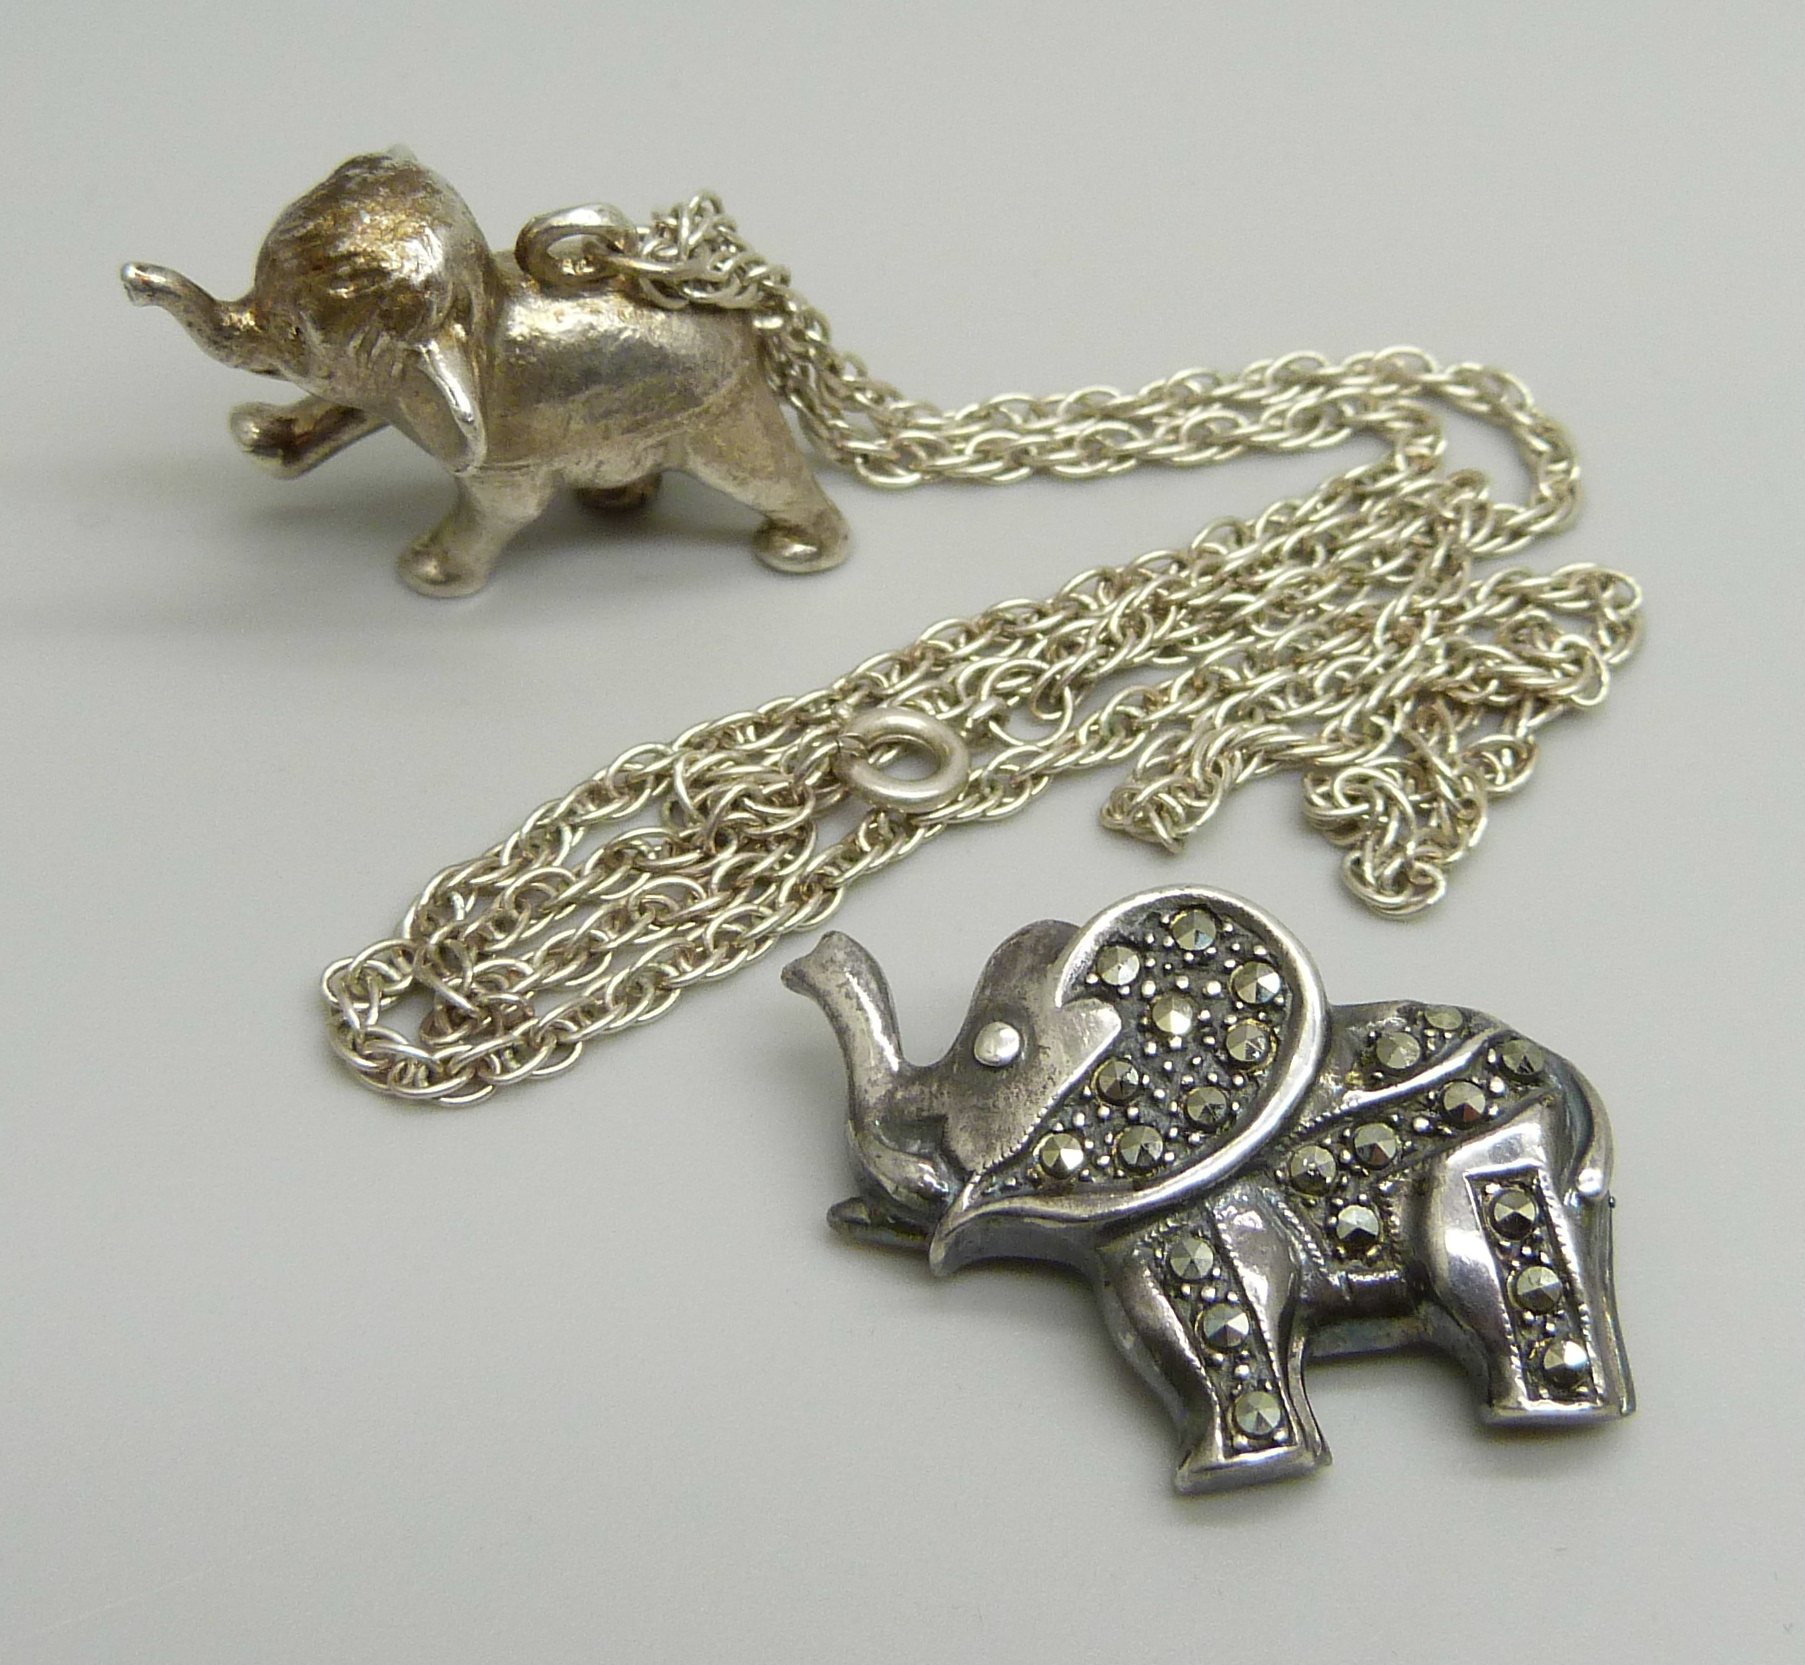 A hallmarked silver Dumbo pendant on a silver chain and a silver and marcasite elephant brooch